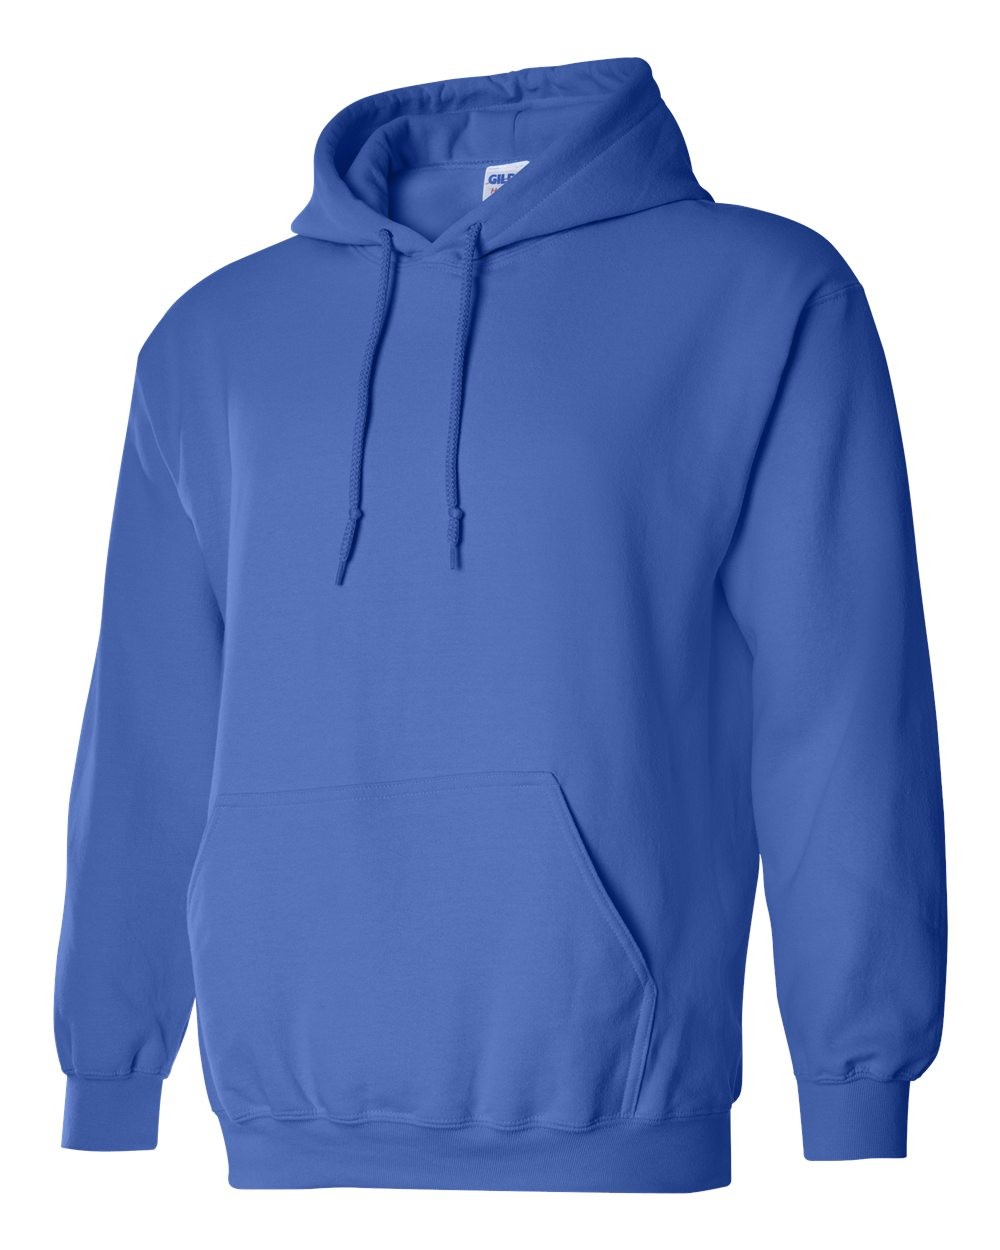 St. Peter Royal Pullover Hoodie w/Logo - Please Allow 2-3 Weeks for Delivery